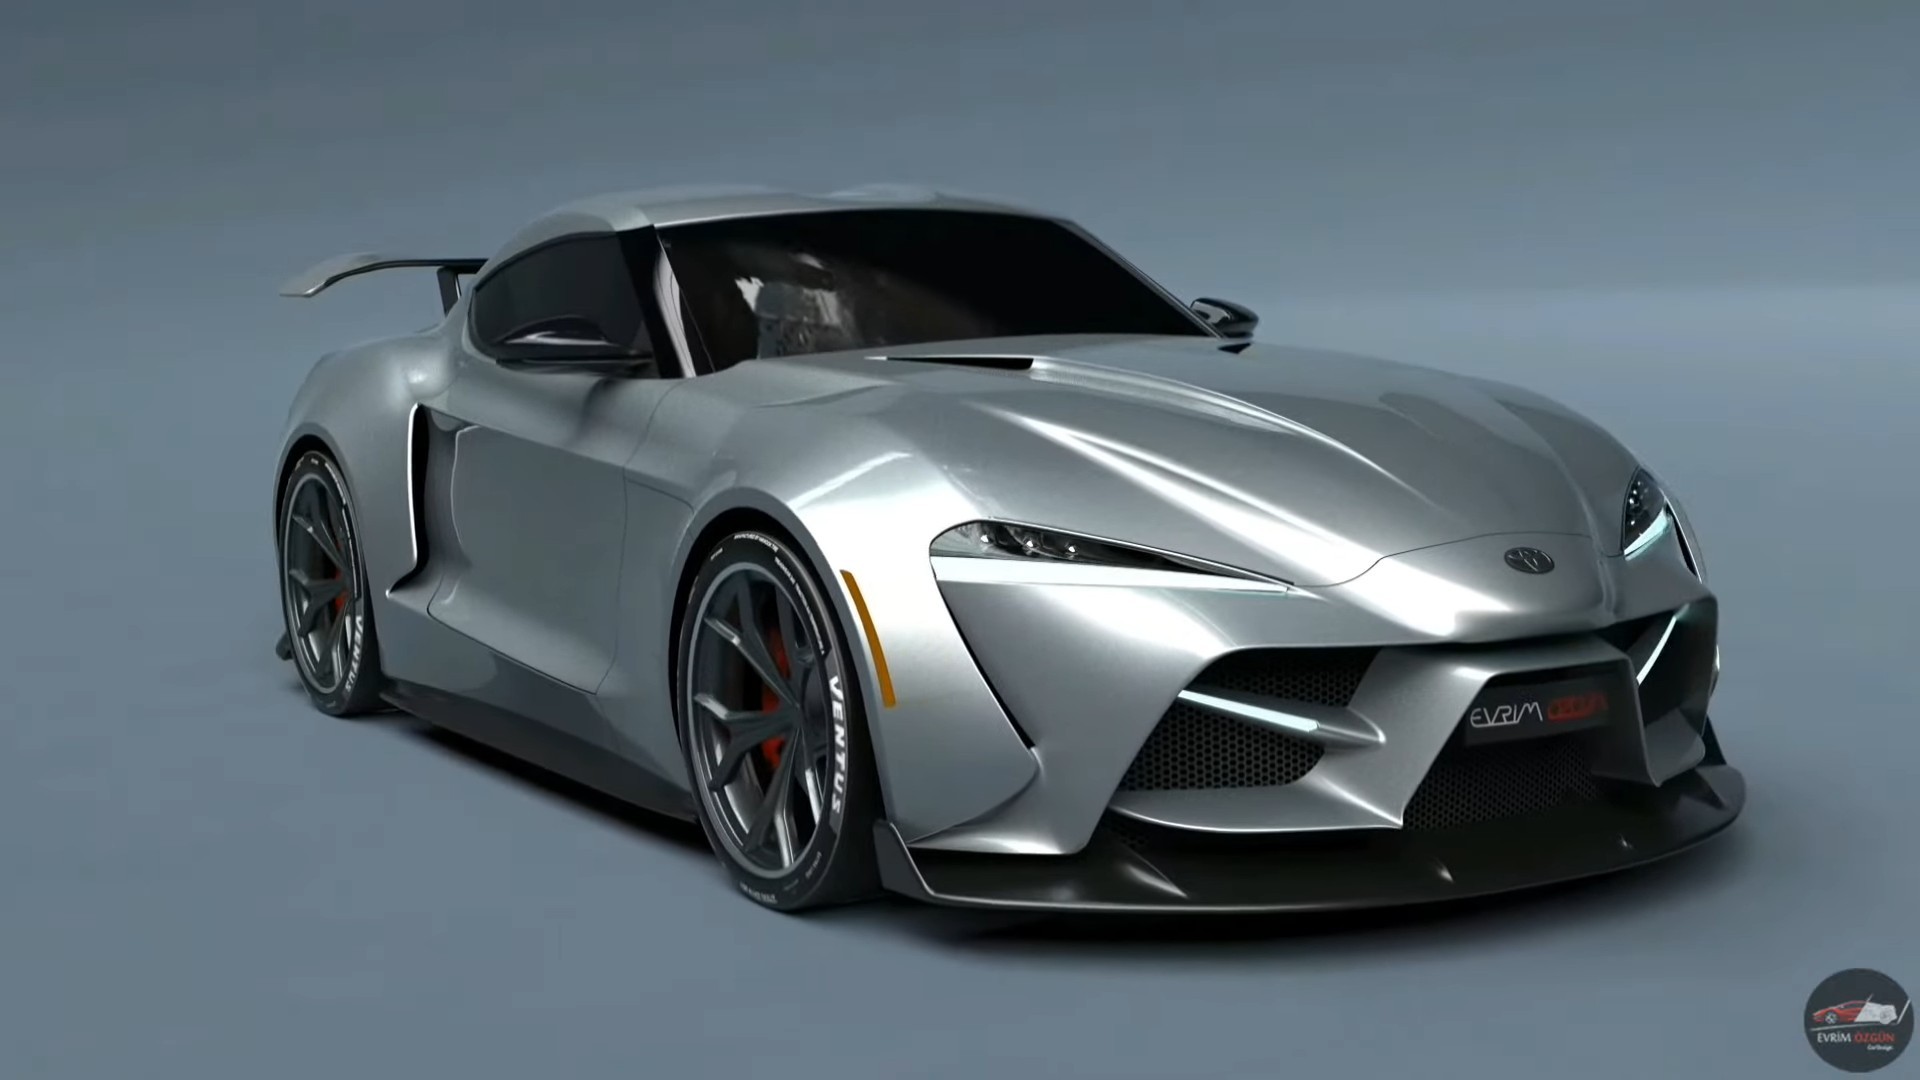 NextGen Toyota Supra Could Be AllElectric, Report, 52 OFF